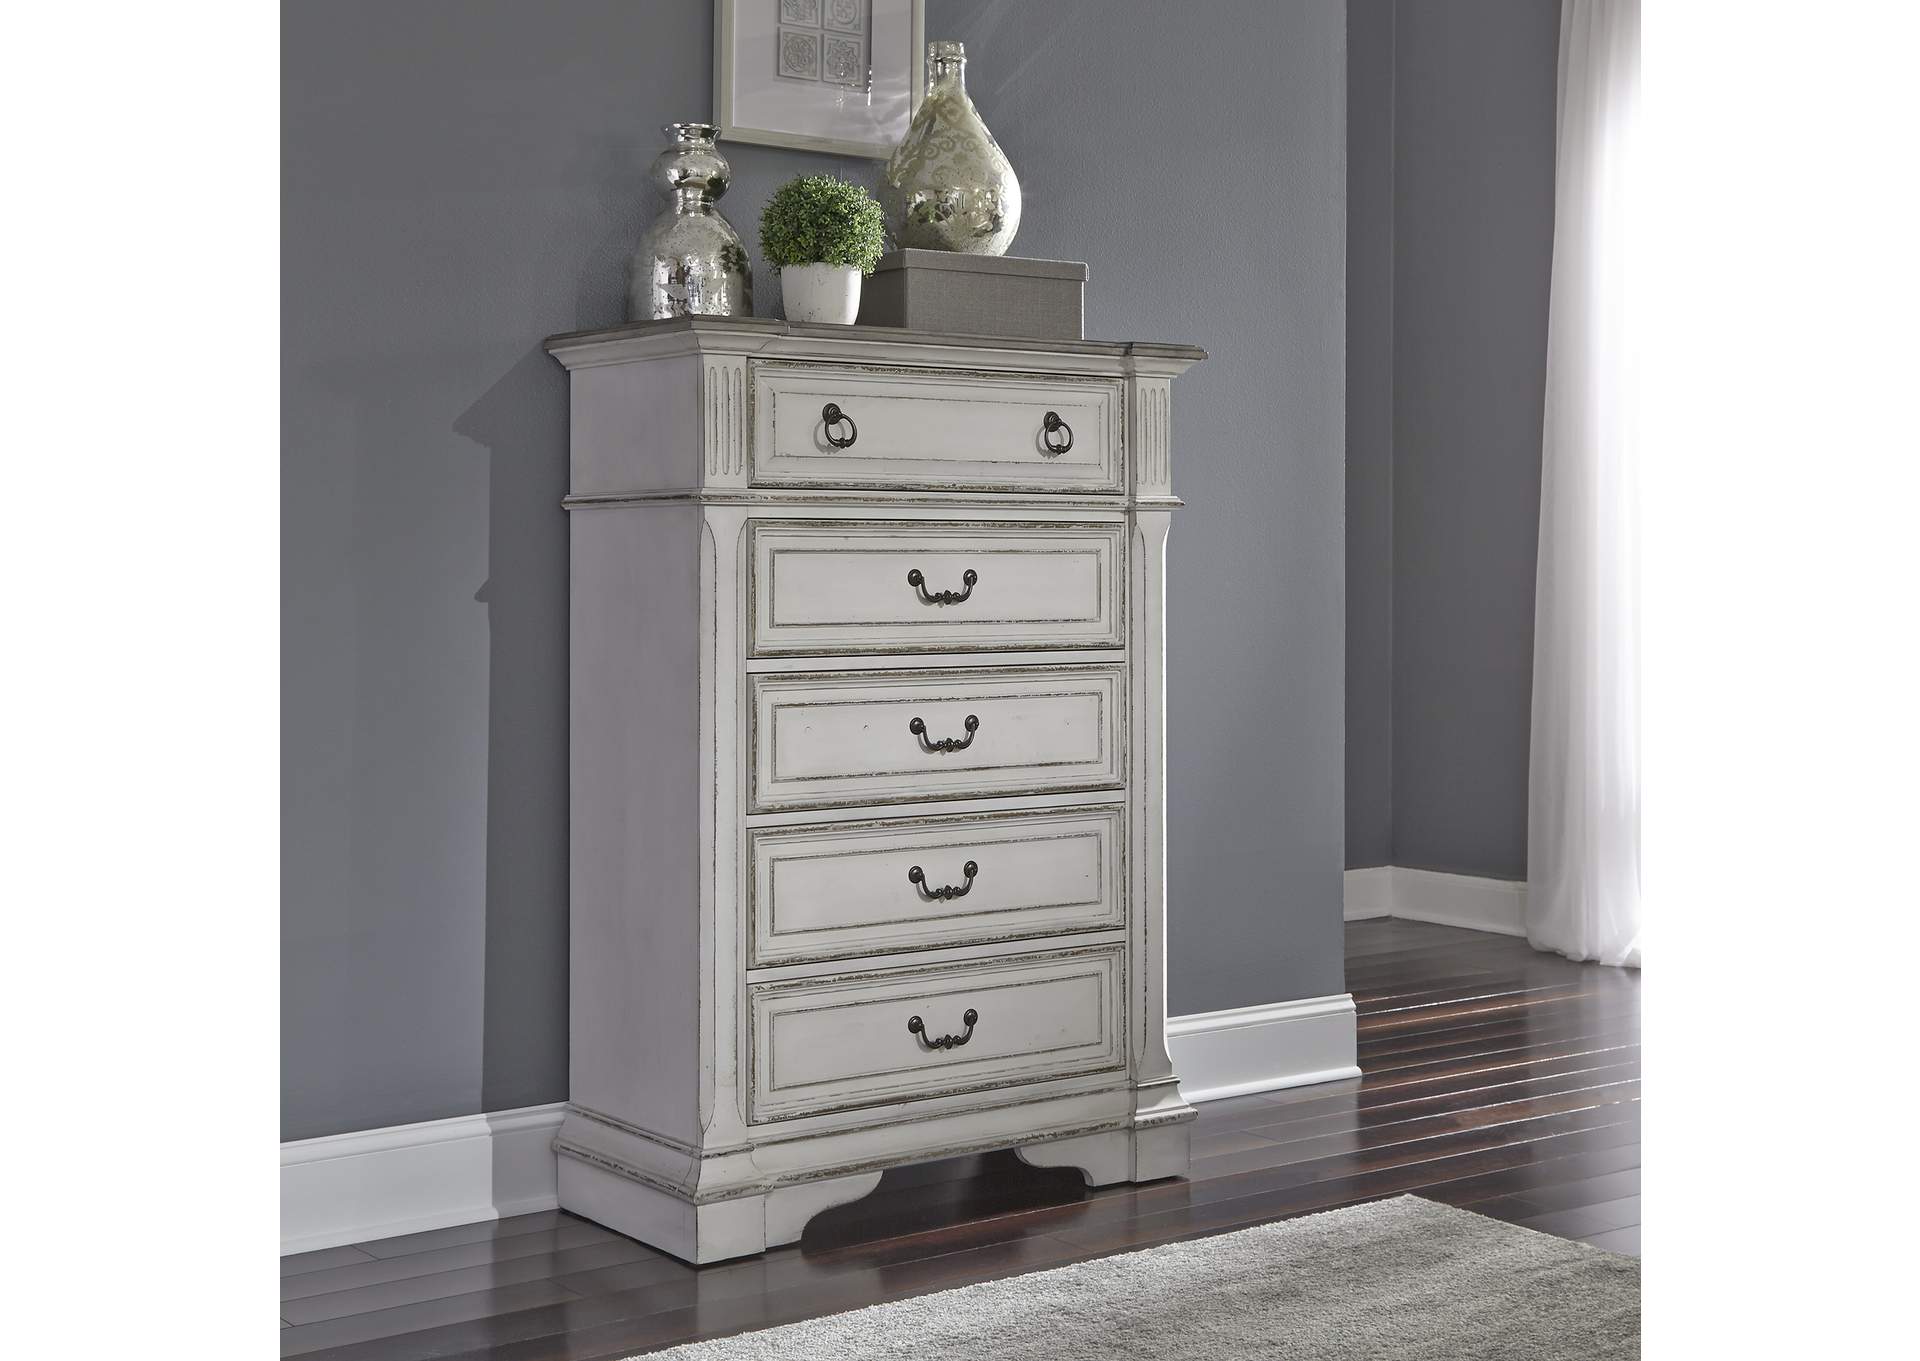 Abbey Park 5 Drawer Chest,Liberty